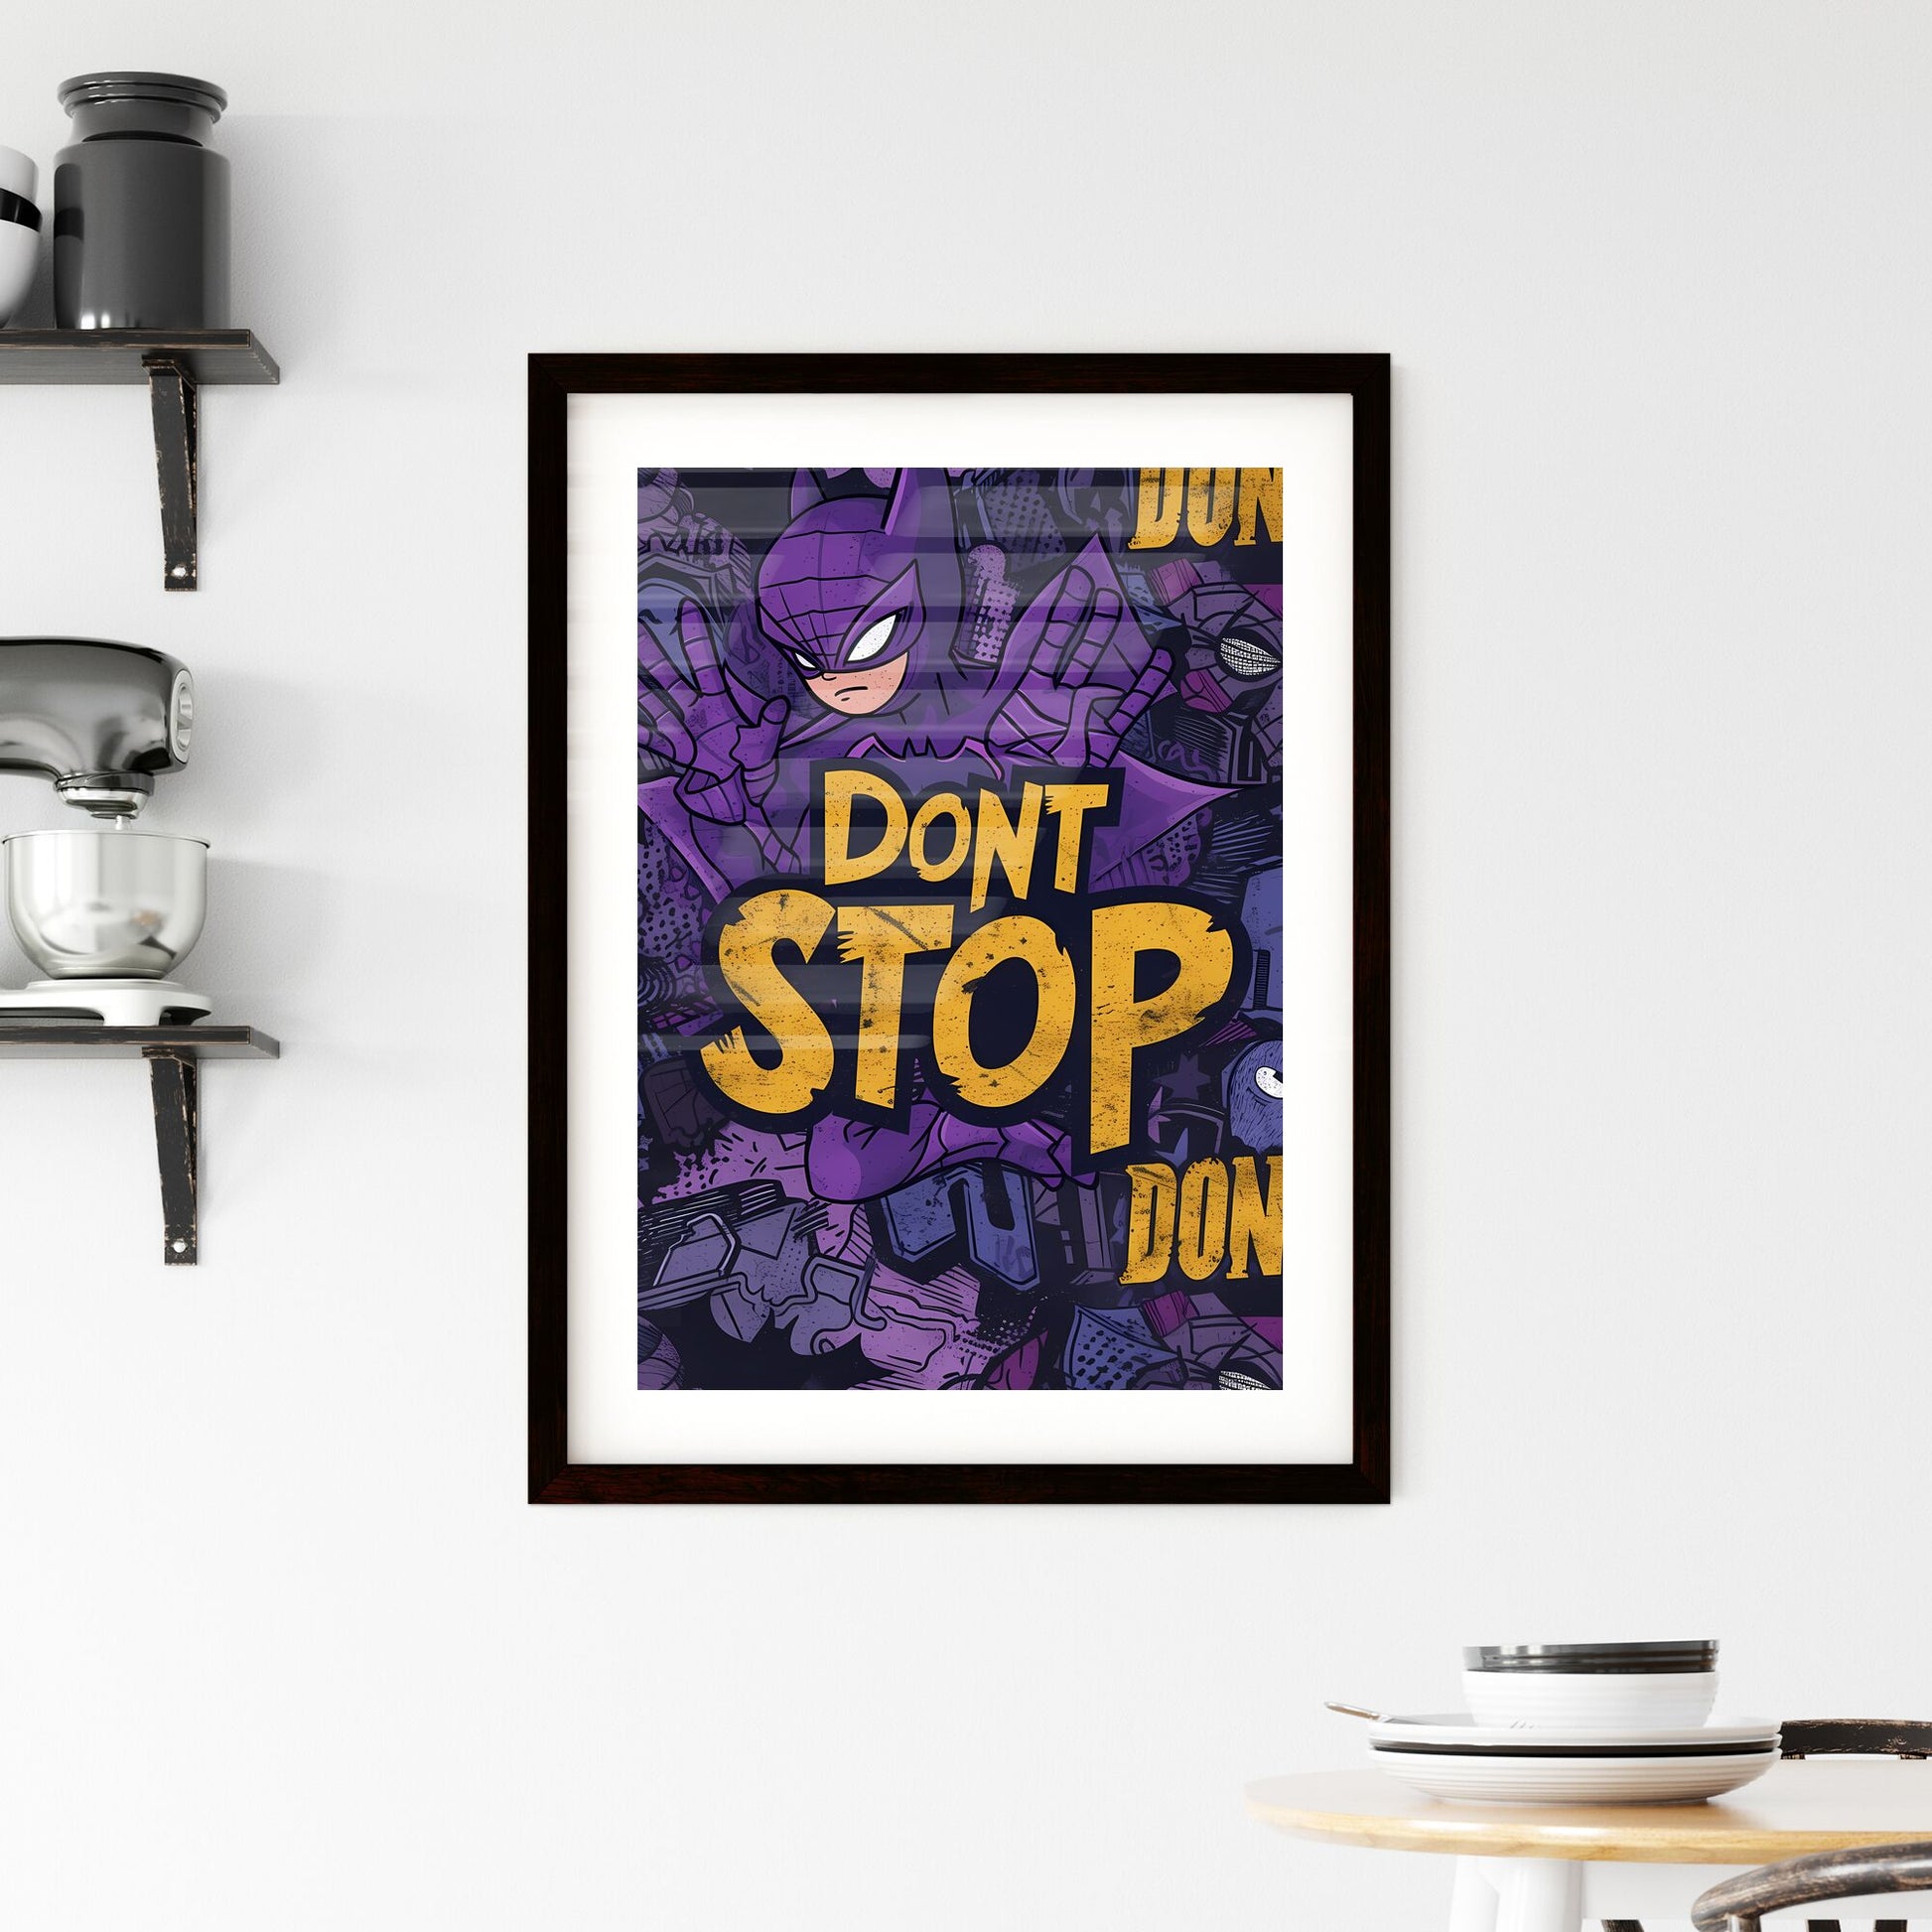 Repeated pattern of the word DONT STOP in hand-writting graffiti-style - Art print of a purple and yellow poster with a cartoon character Default Title